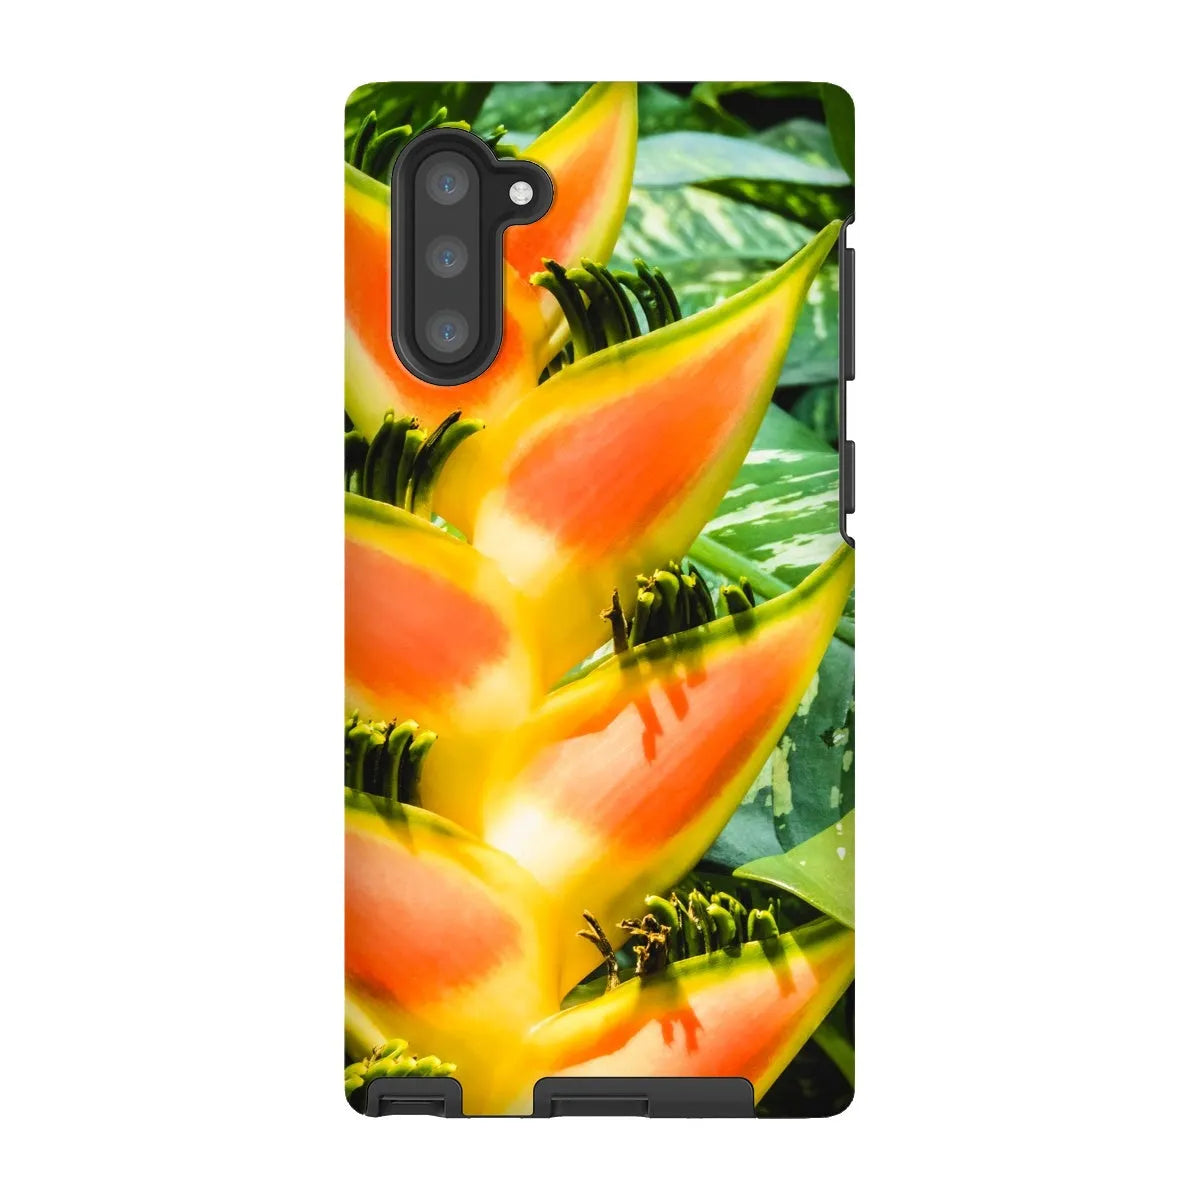 Showstopper Tough Phone Case - Samsung Galaxy Note 10 / Matte - Mobile Phone Cases - Aesthetic Art